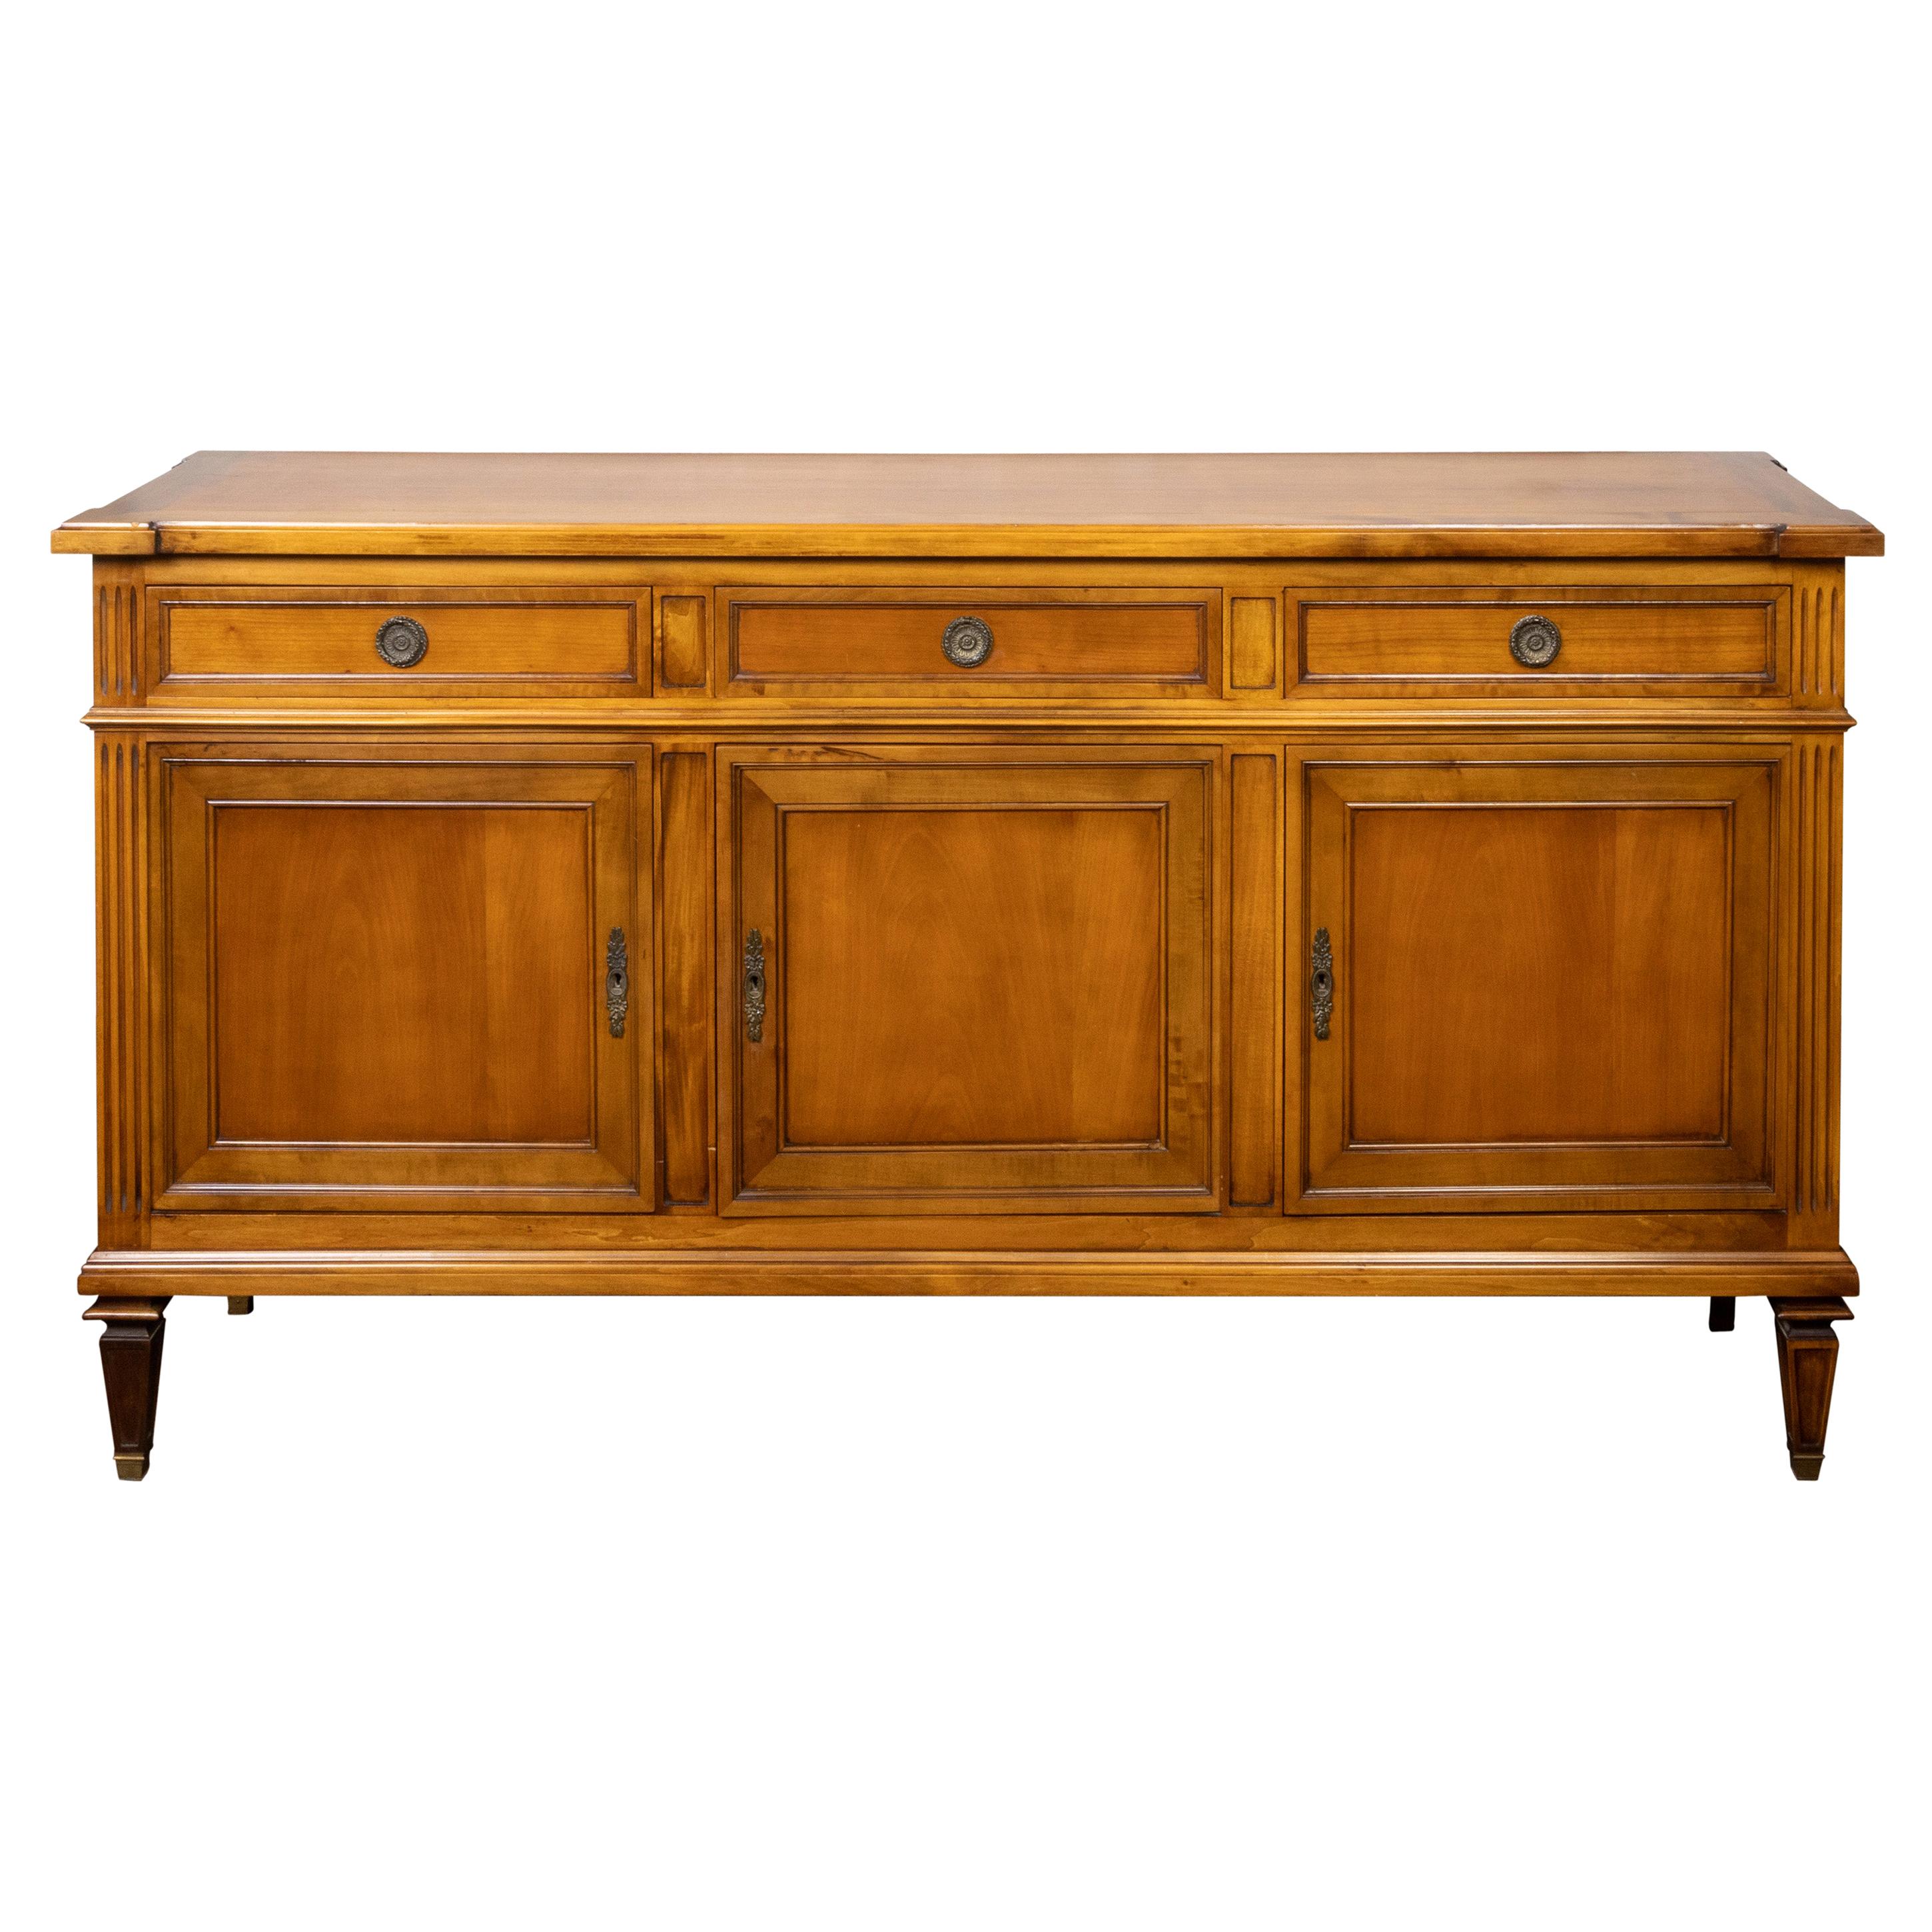 French 1920s Walnut Enfilade with Drawers over Doors and Fluted Side Posts